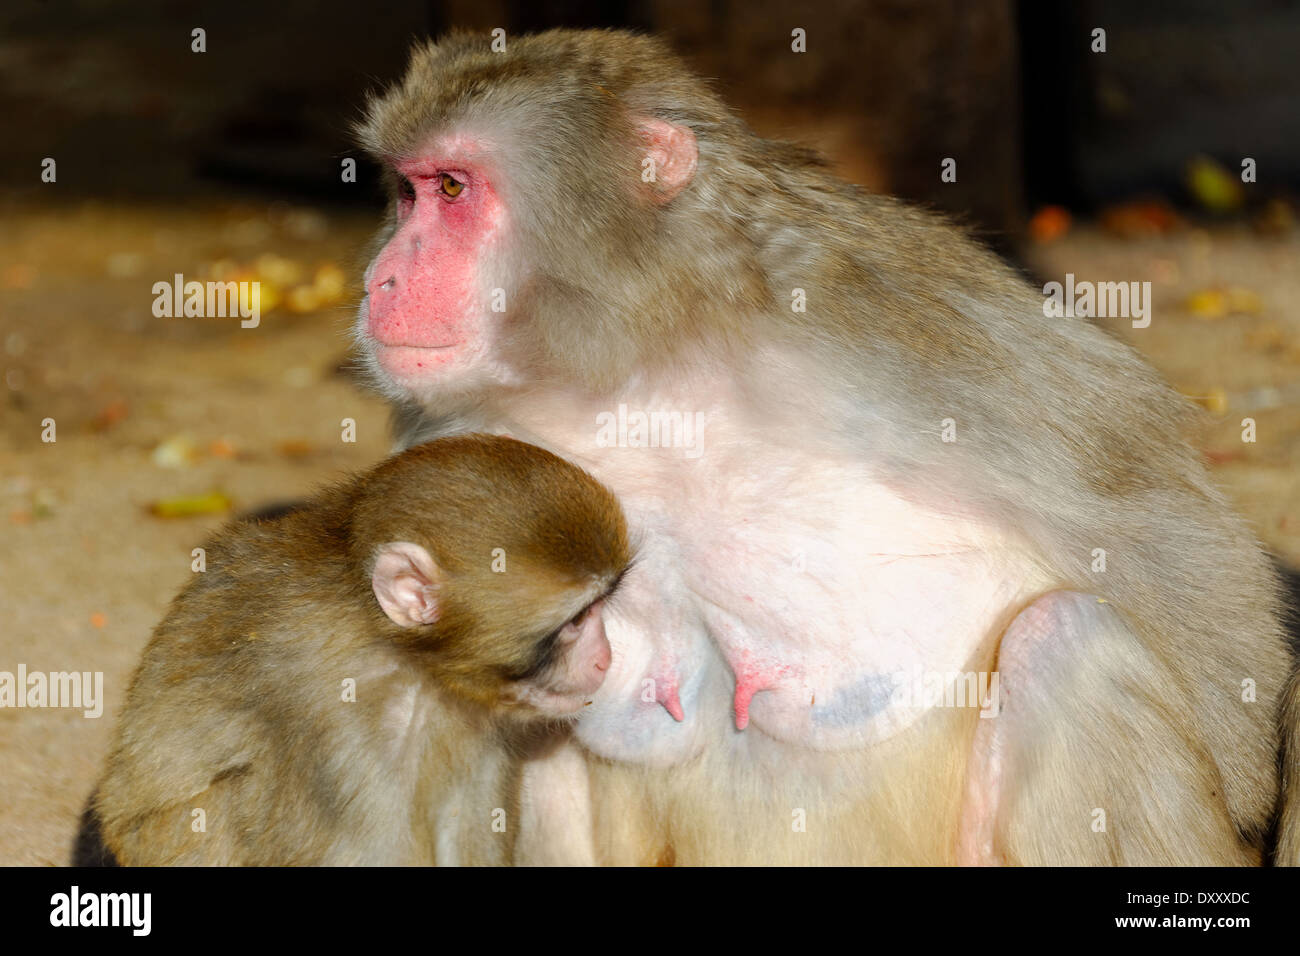 Japanese macaque (Macaca fuscata), is a terrestrial Old World monkey species native to Japan. Stock Photo